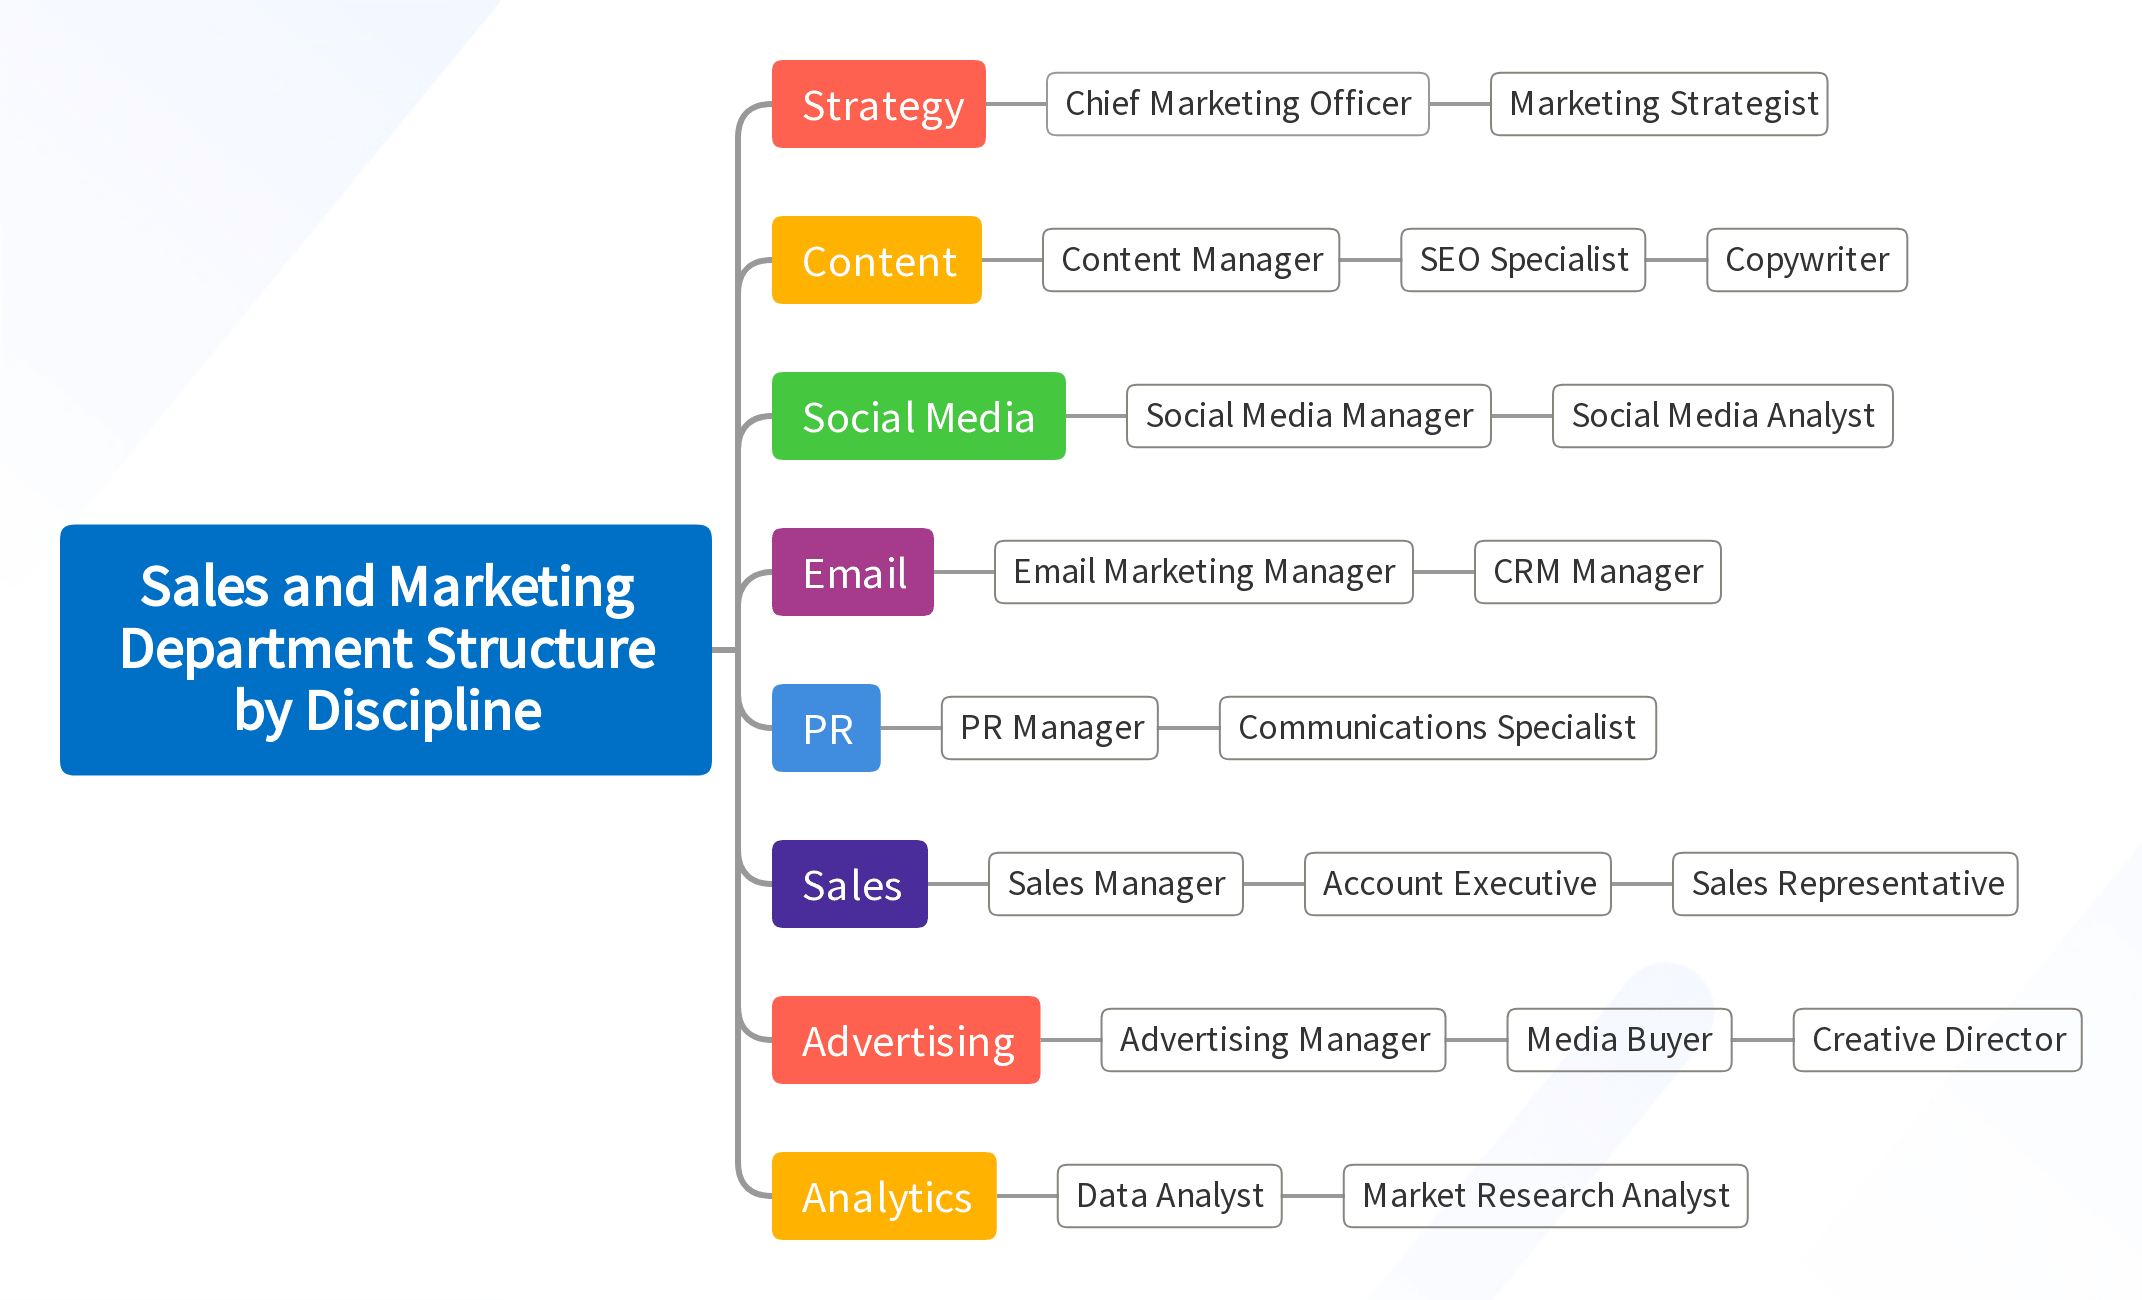 Sales and Marketing Department Structure by Discipline